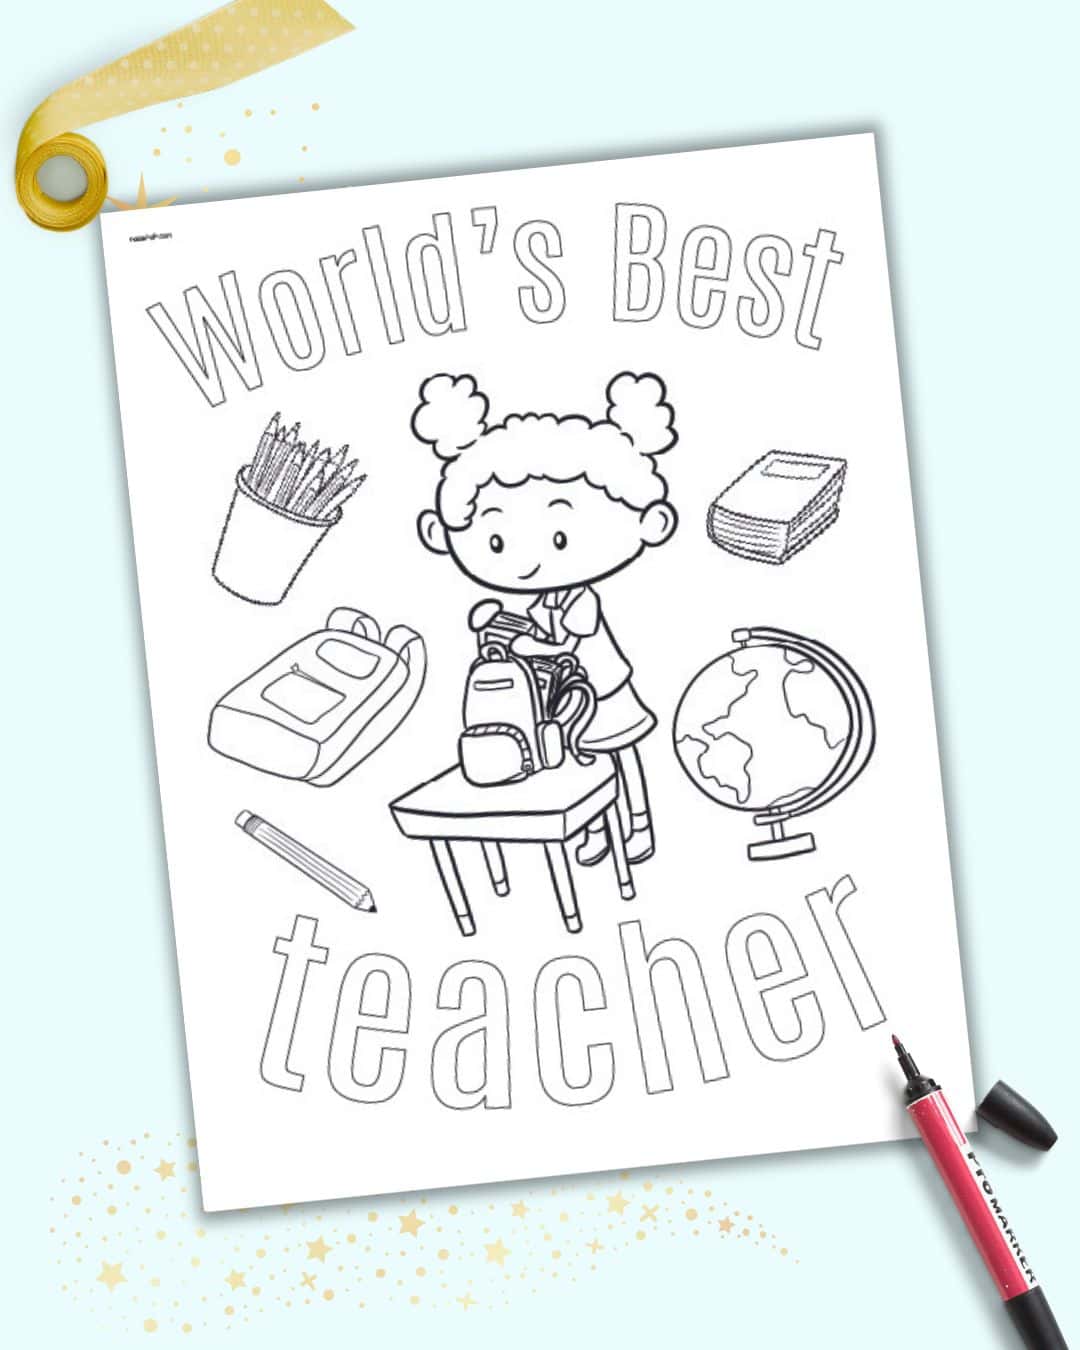 a coloring page with a girl at her desk and the text "world's best teacher"